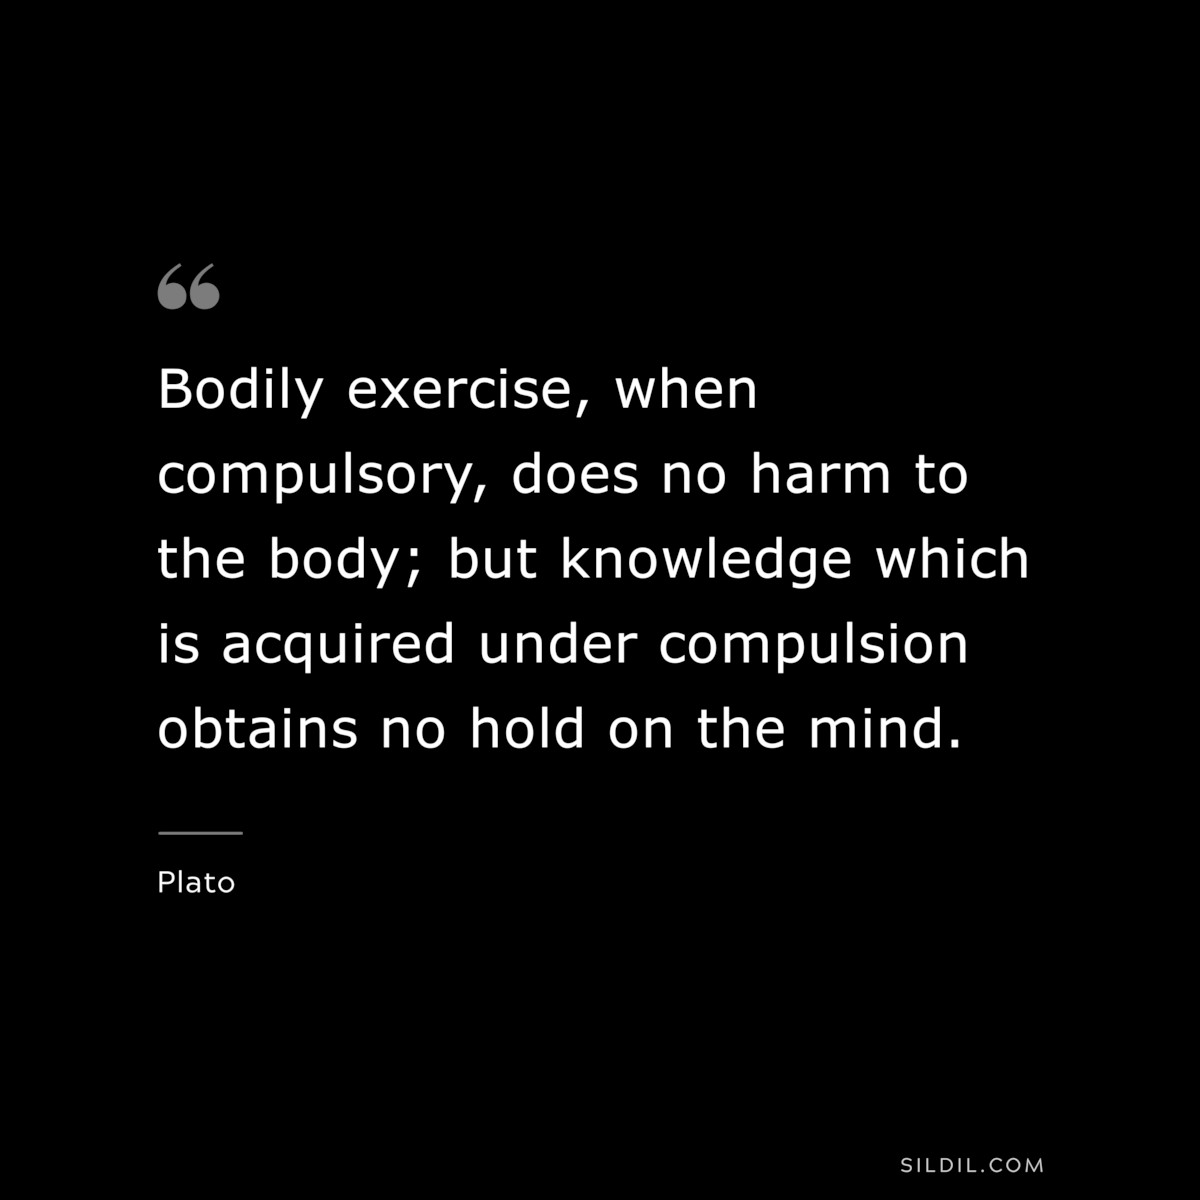 Bodily exercise, when compulsory, does no harm to the body; but knowledge which is acquired under compulsion obtains no hold on the mind. ― Plato